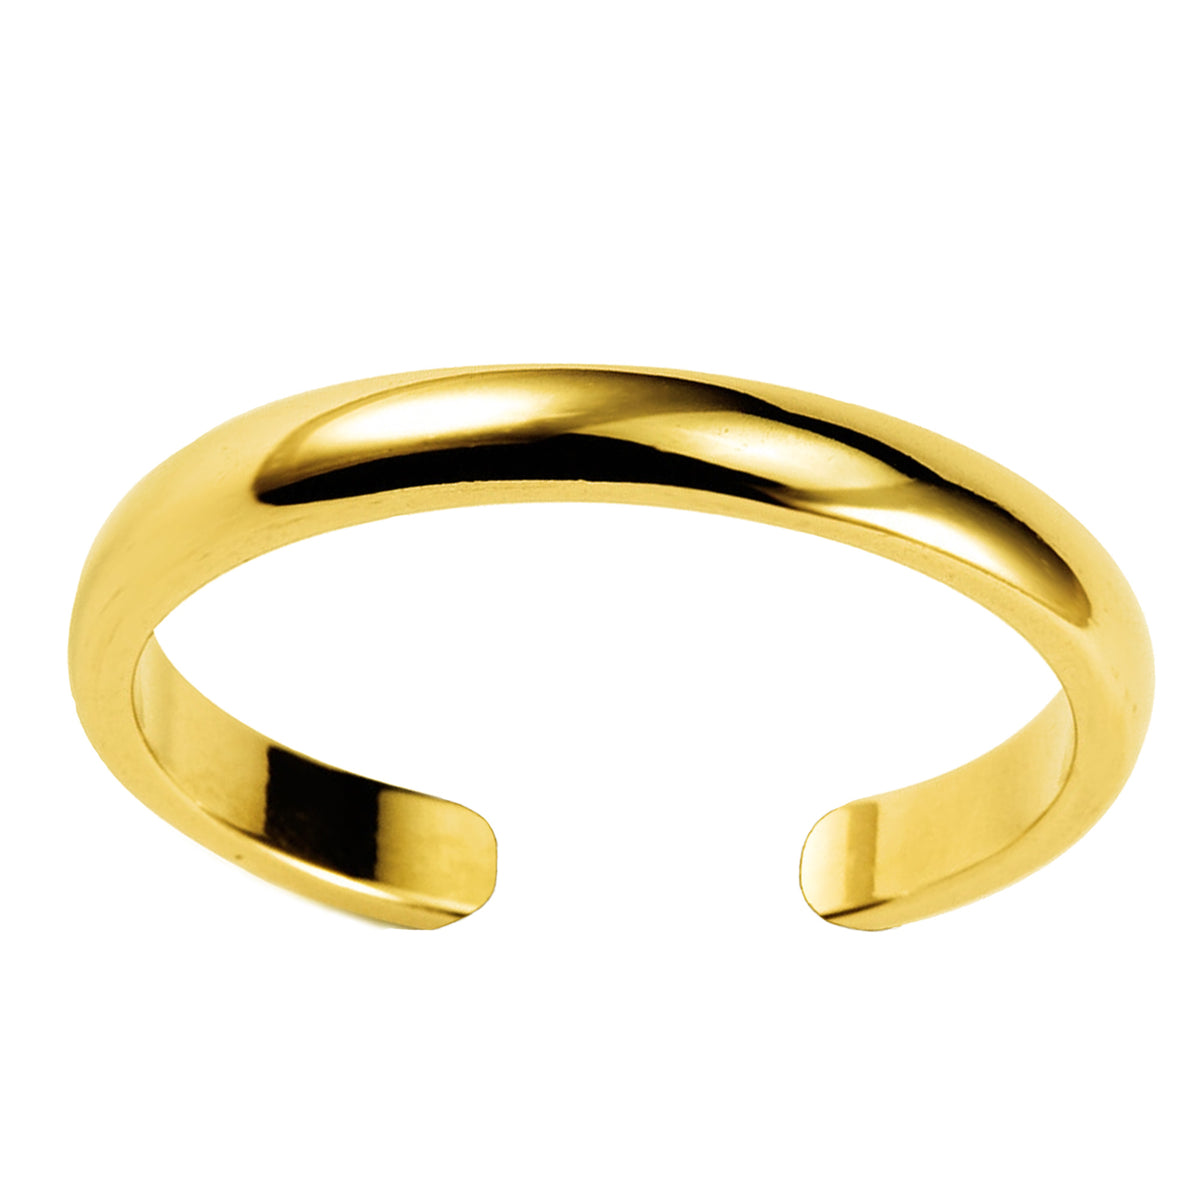 14K Yellow Gold Shiny Cuff Style Adjustable Toe Ring 3mm fine designer jewelry for men and women